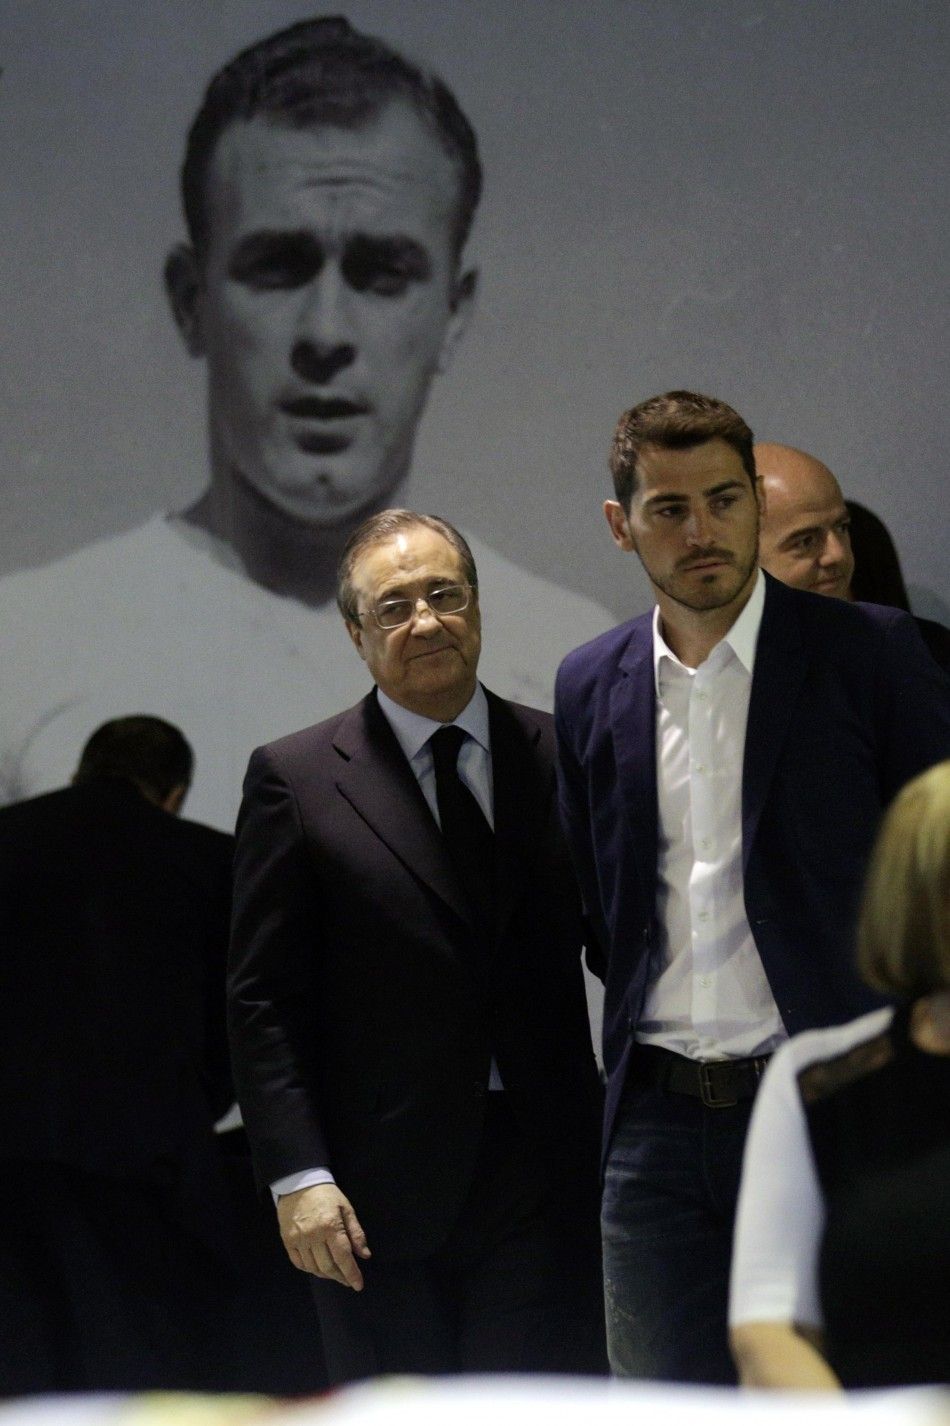 Real Madrids goalkeeper and captain Iker Casillas R greets Real Madrid president Florentino Perez 